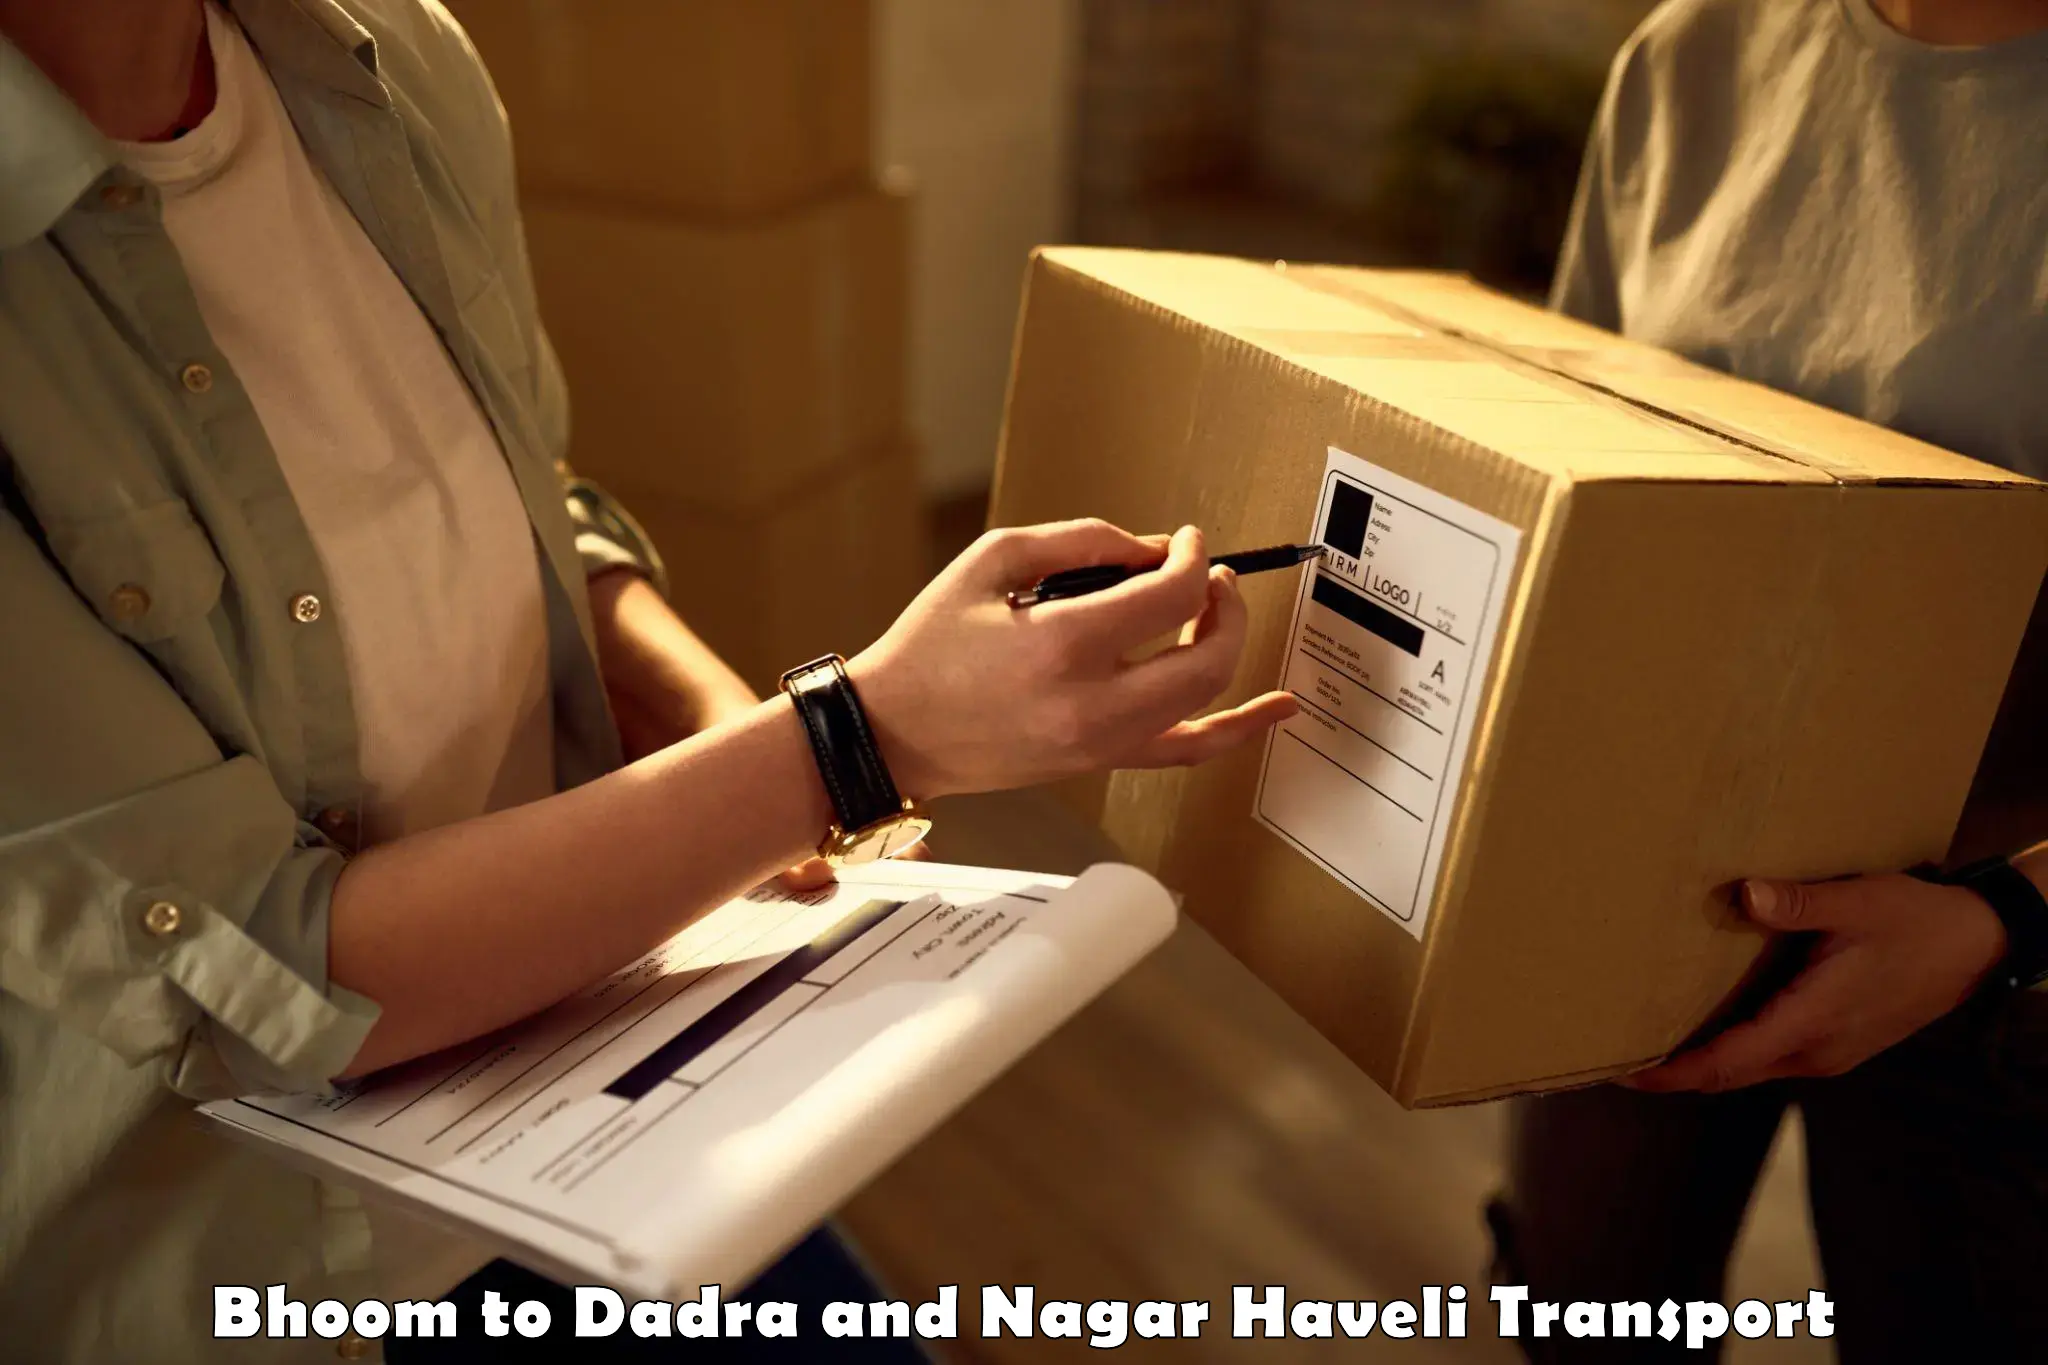 Transport shared services Bhoom to Dadra and Nagar Haveli